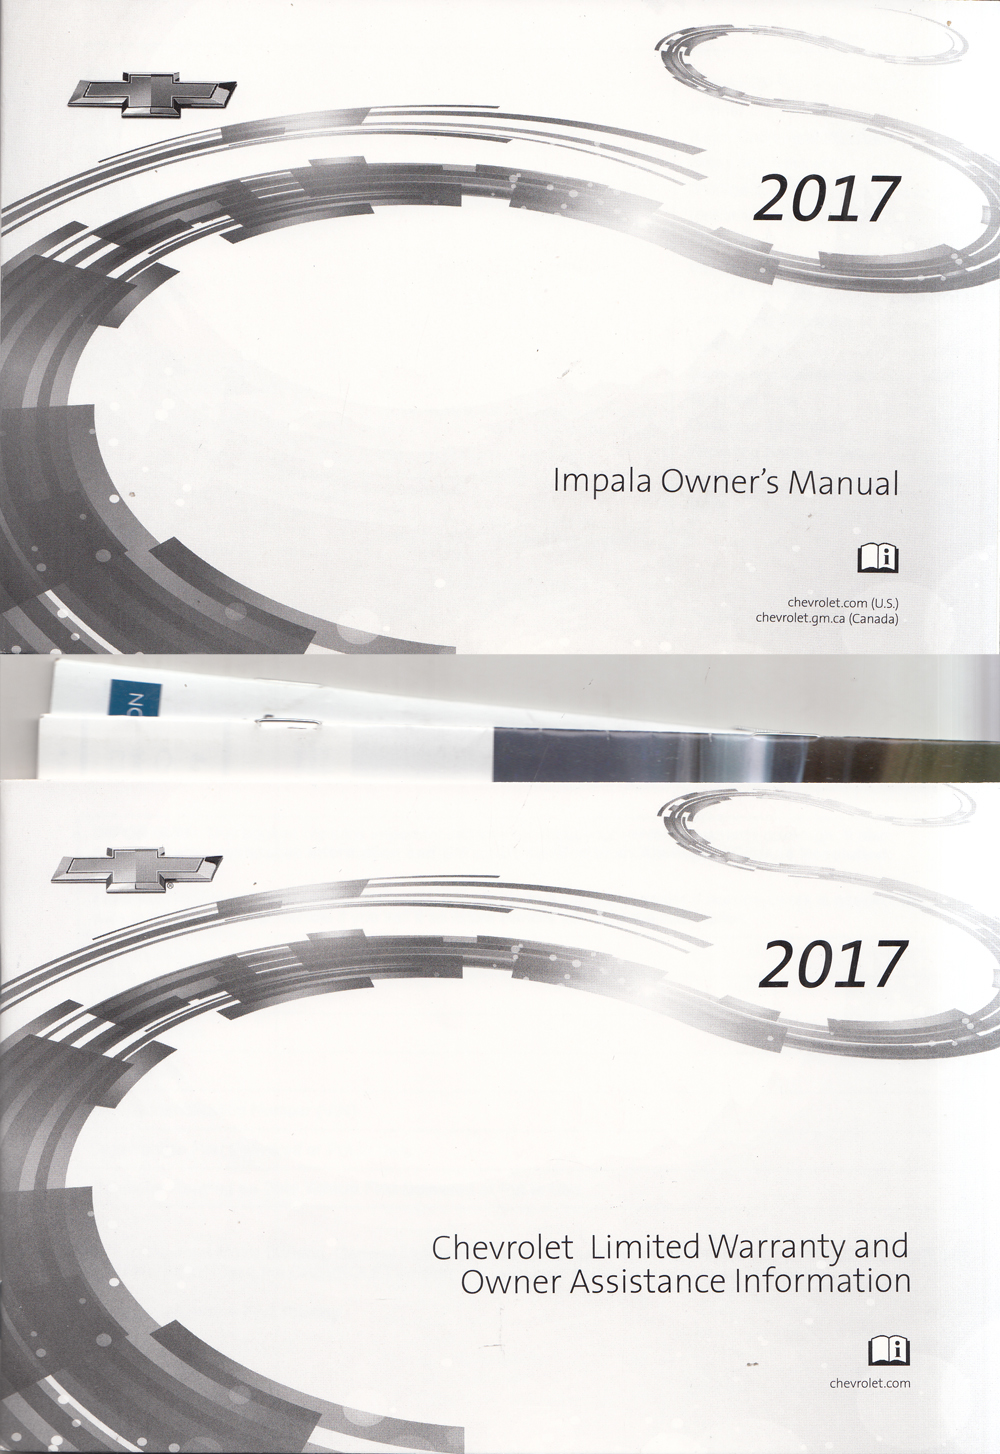 2017 Chevrolet Impala Owners Manual with Pamphlets Original